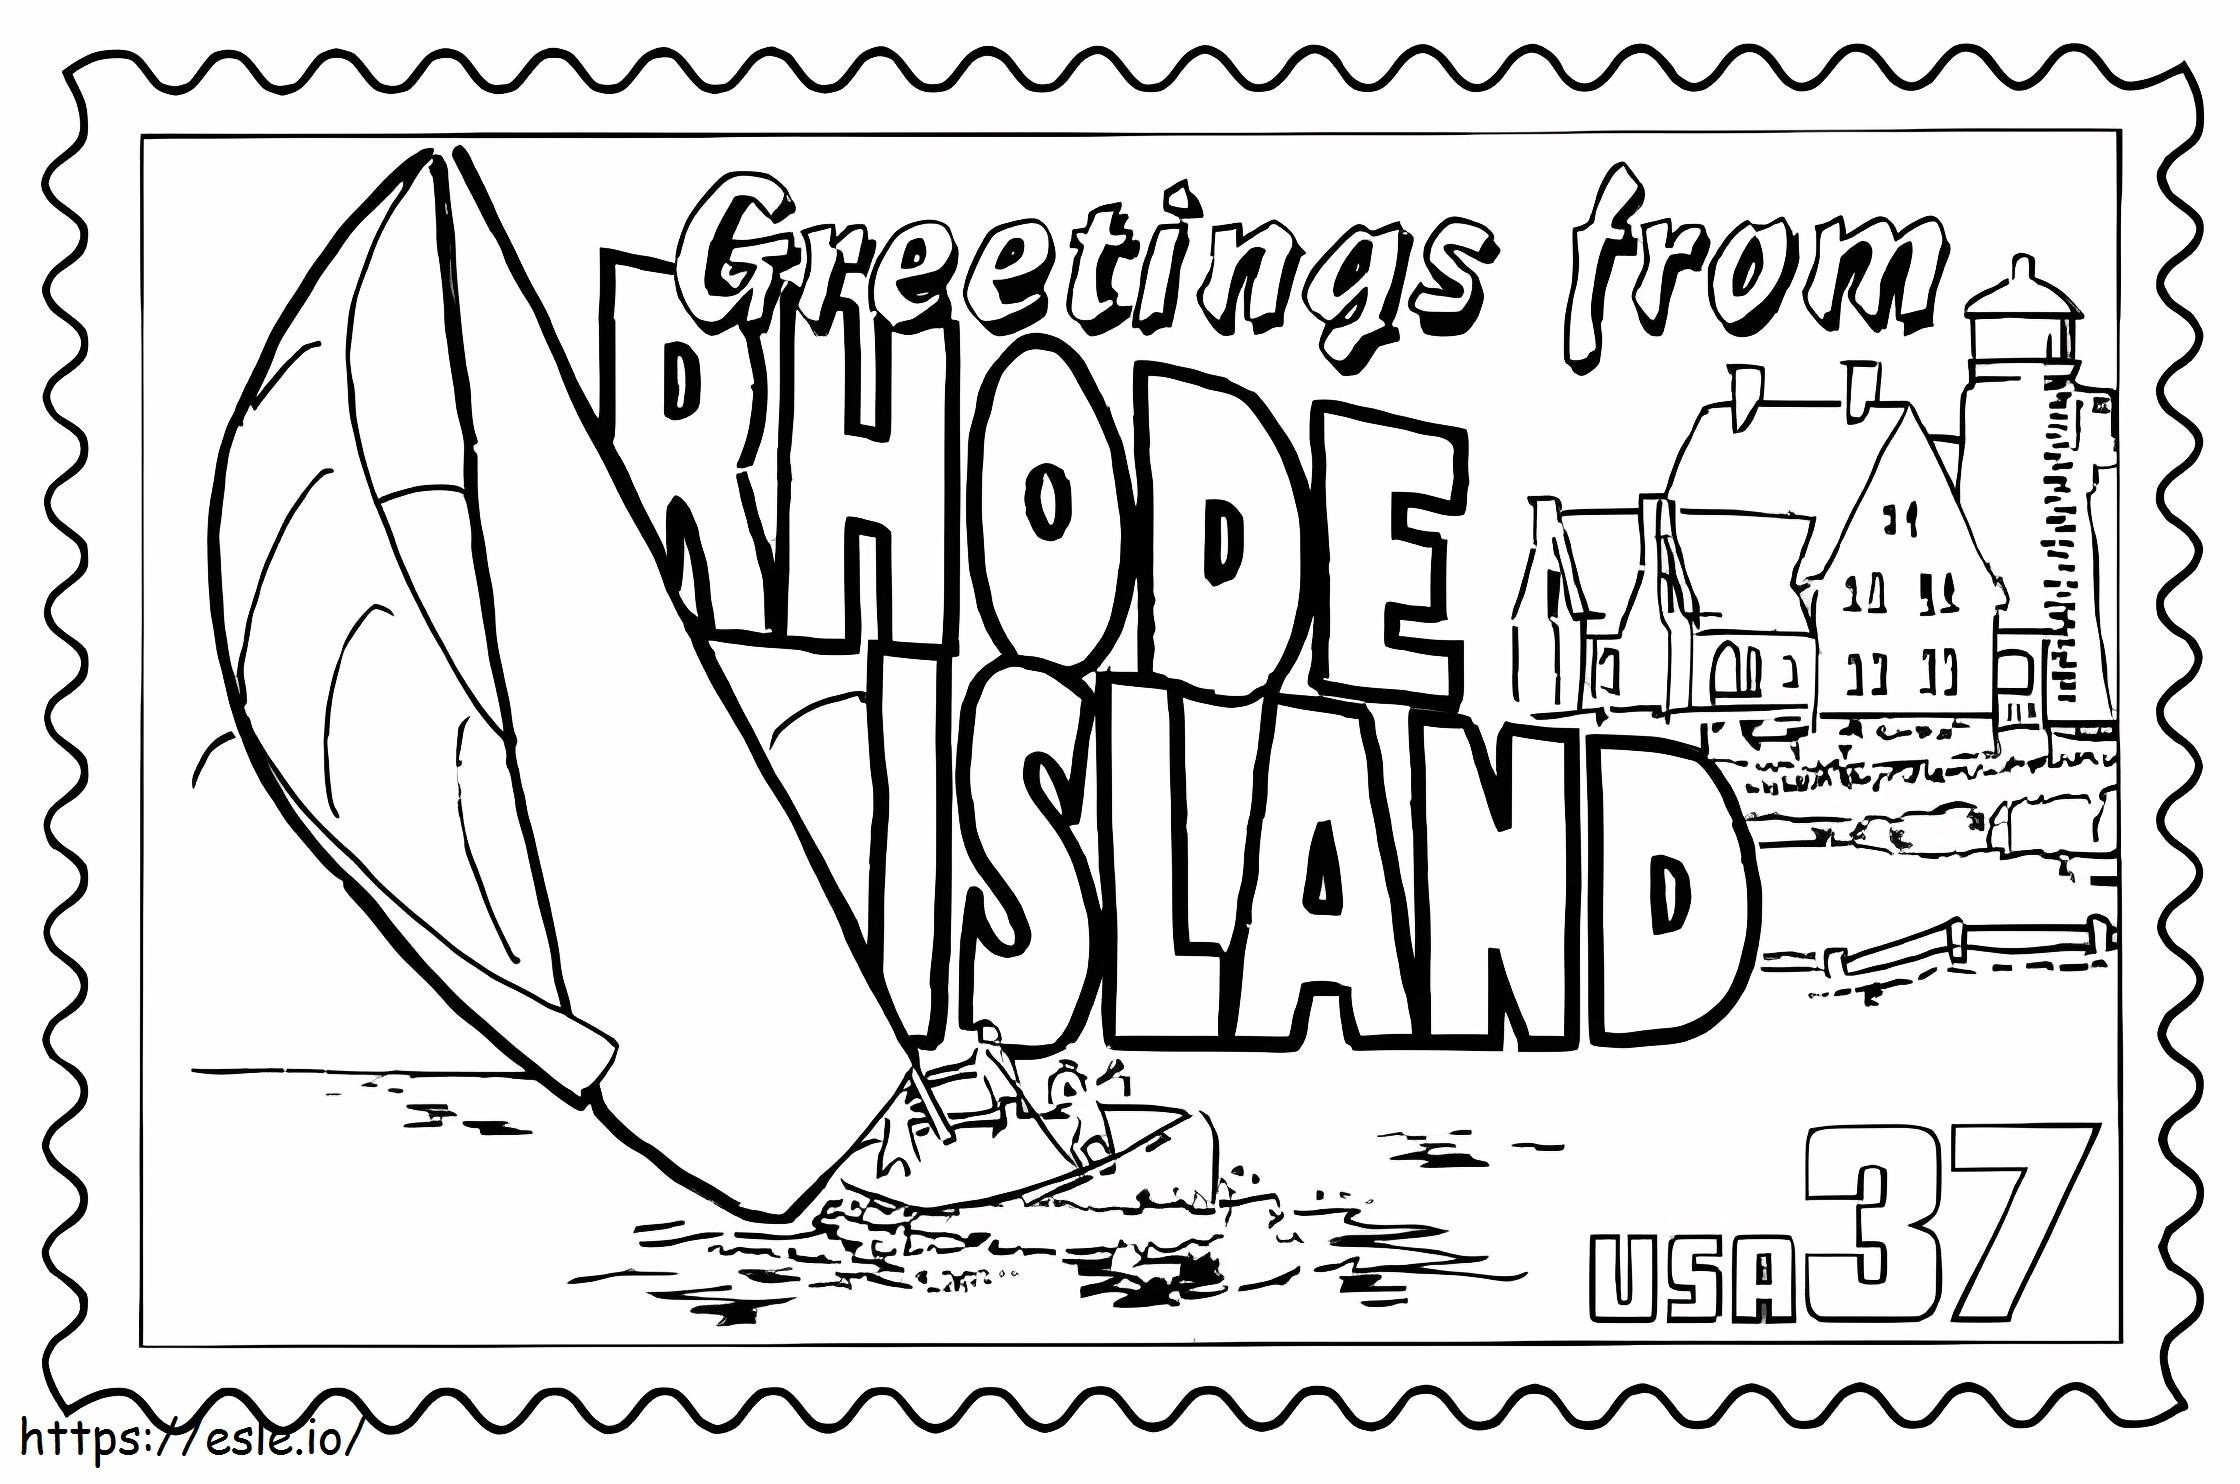 Rhode Island Stamp coloring page